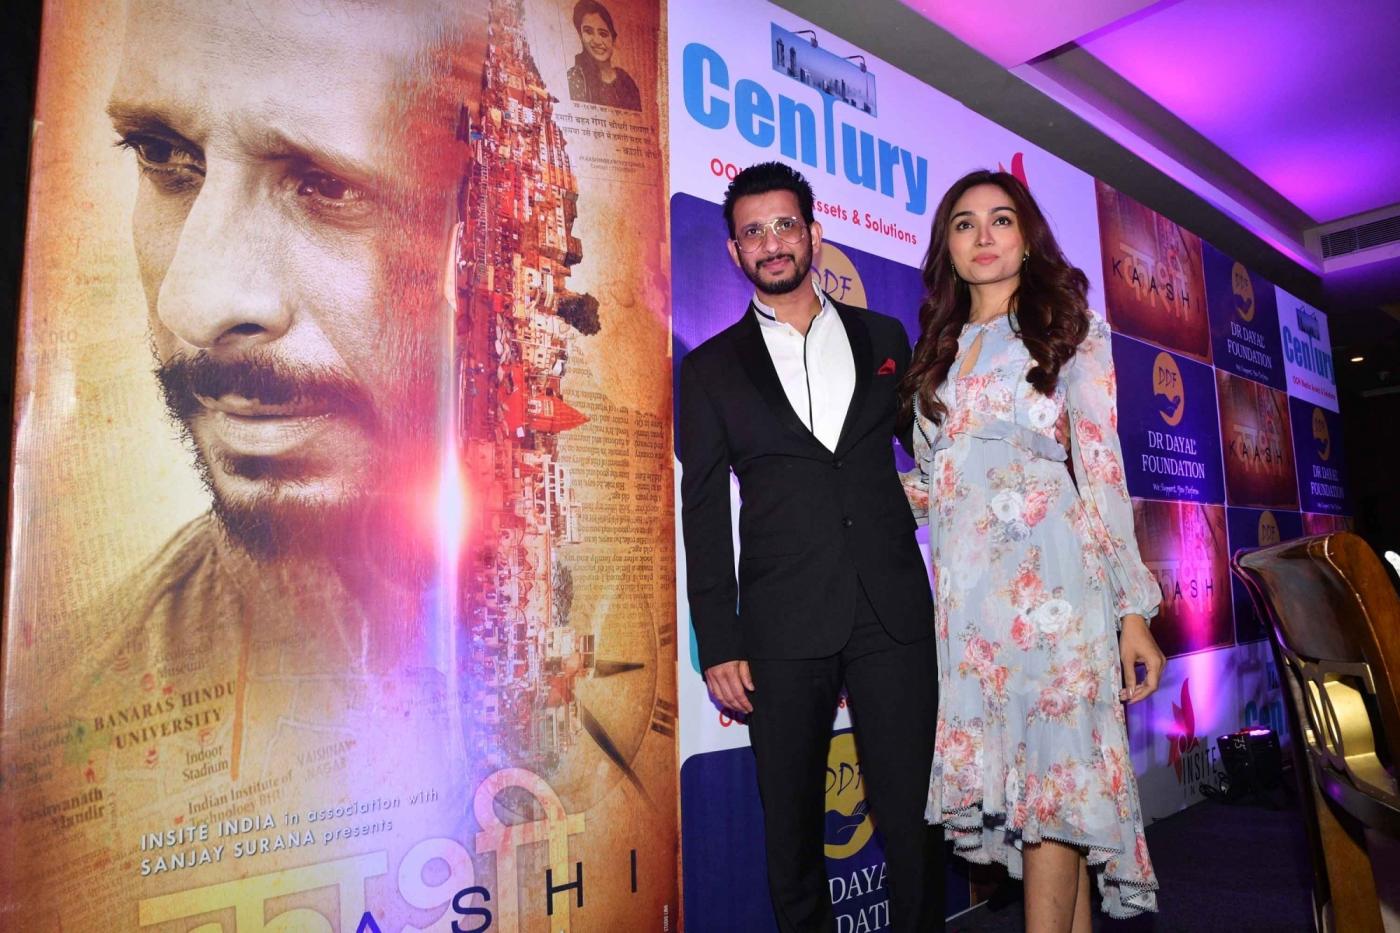 Patna: Actors Sharman Joshi and Aishwarya Devan at a press conference during the promotions of their upcoming film "Kaashi in Search of Ganga", in Patna on Oct 21, 2018. (Photo: IANS) by .